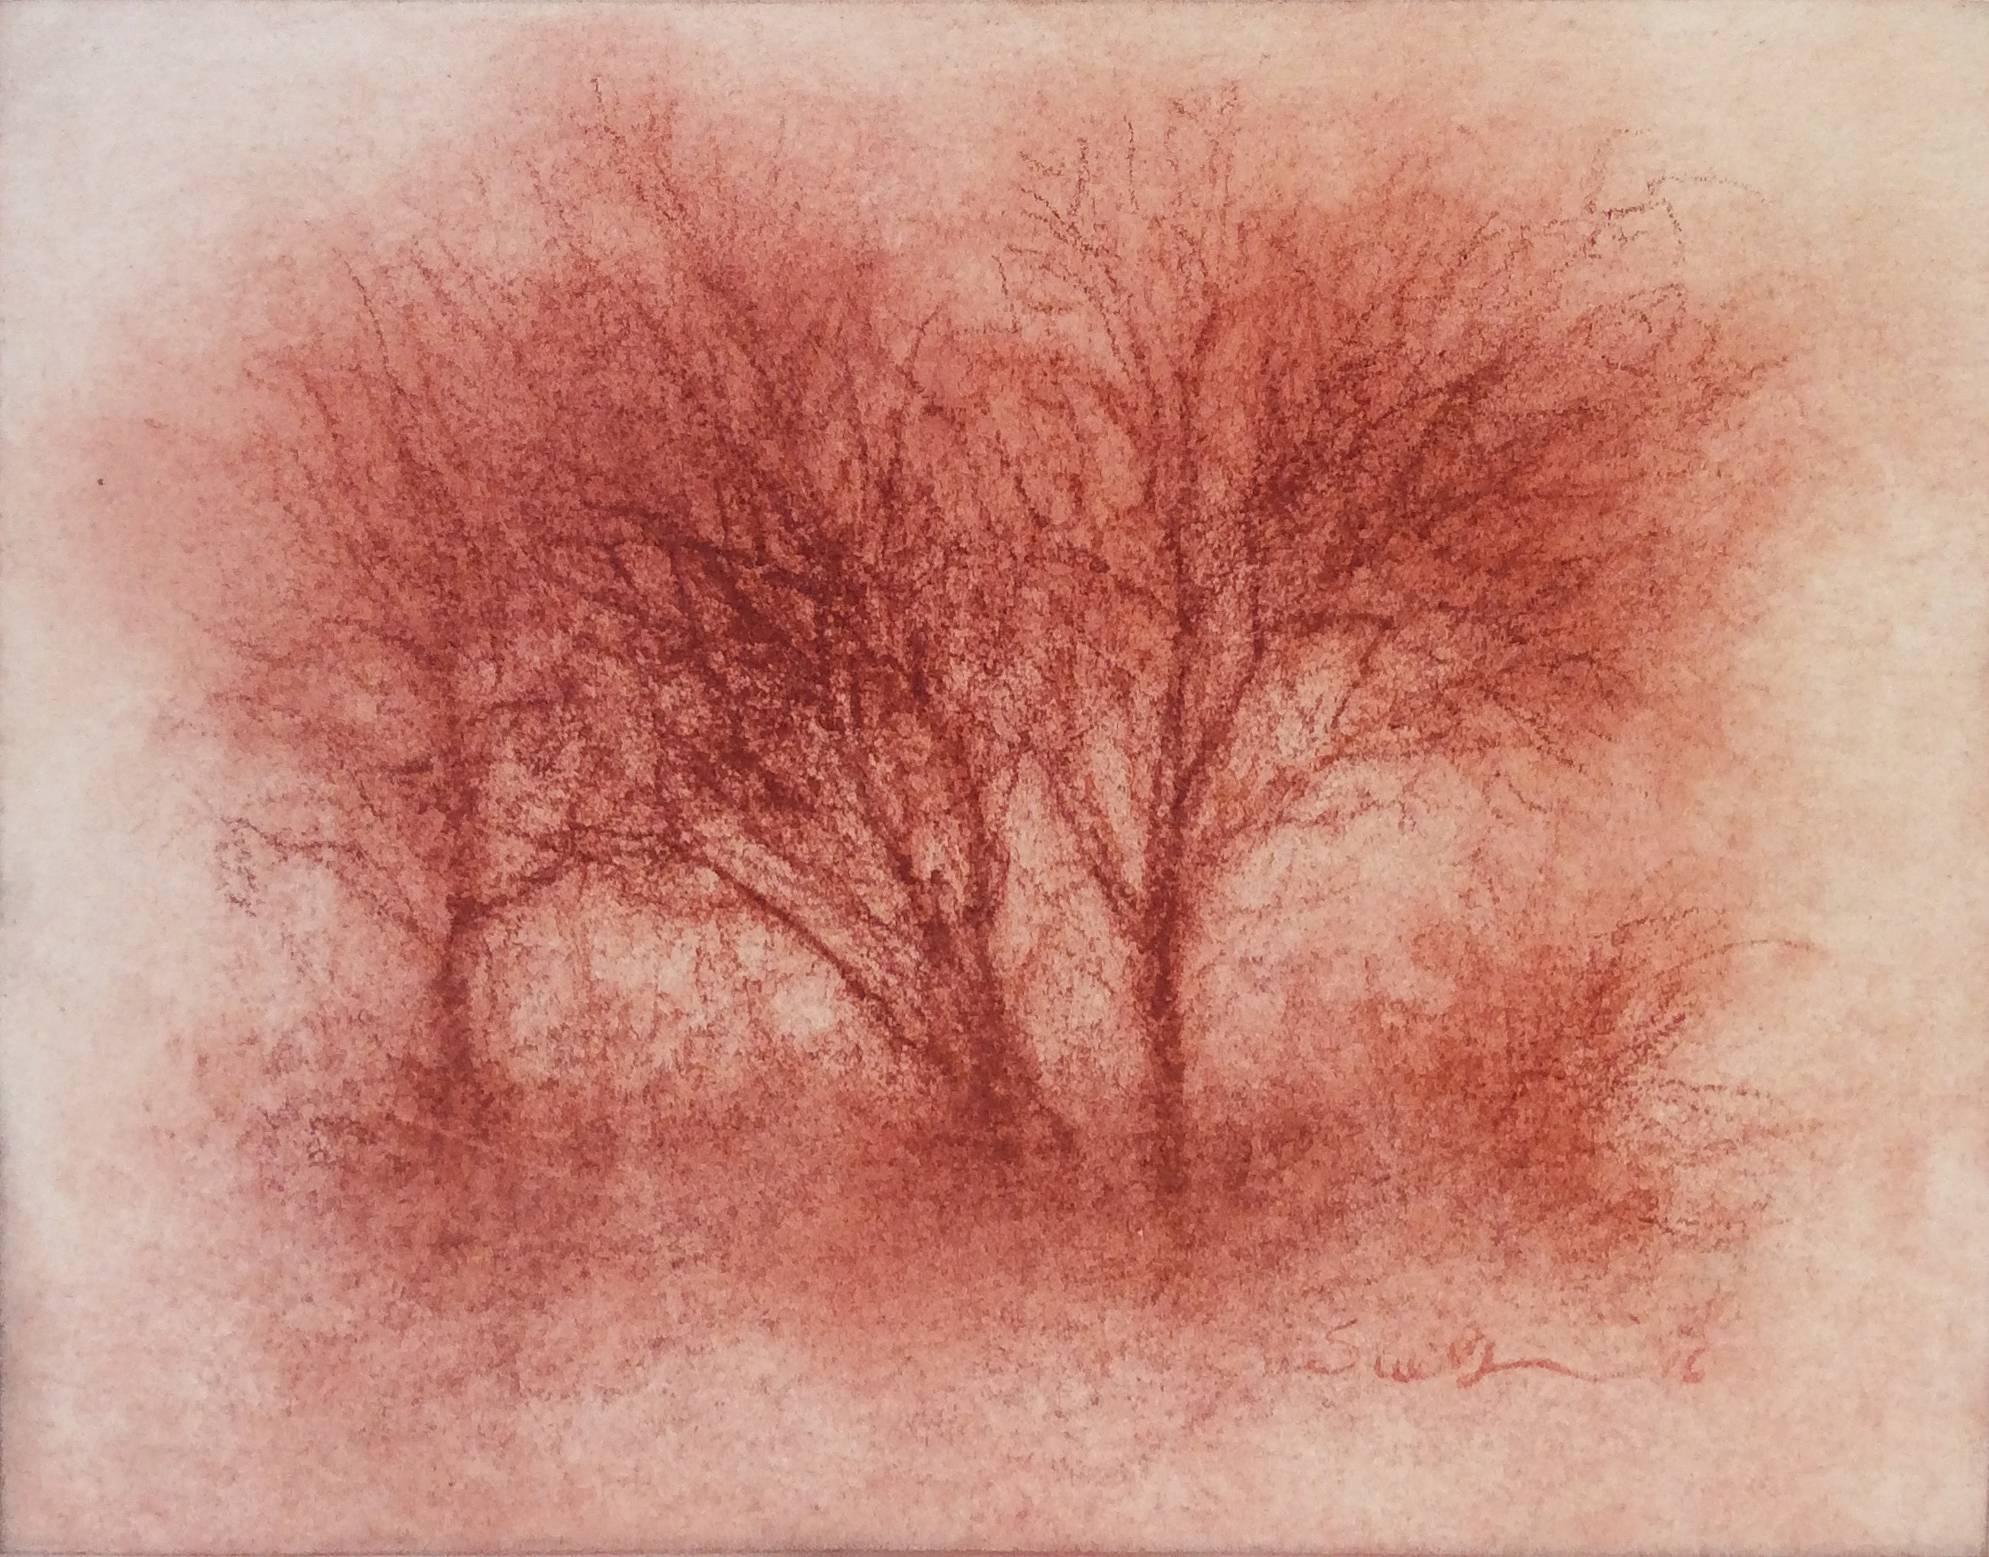 Sue Bryan Landscape Art - Red Trees (Modern, Realistic Red Sanguine Chalk Drawing of Trees in Landscape)